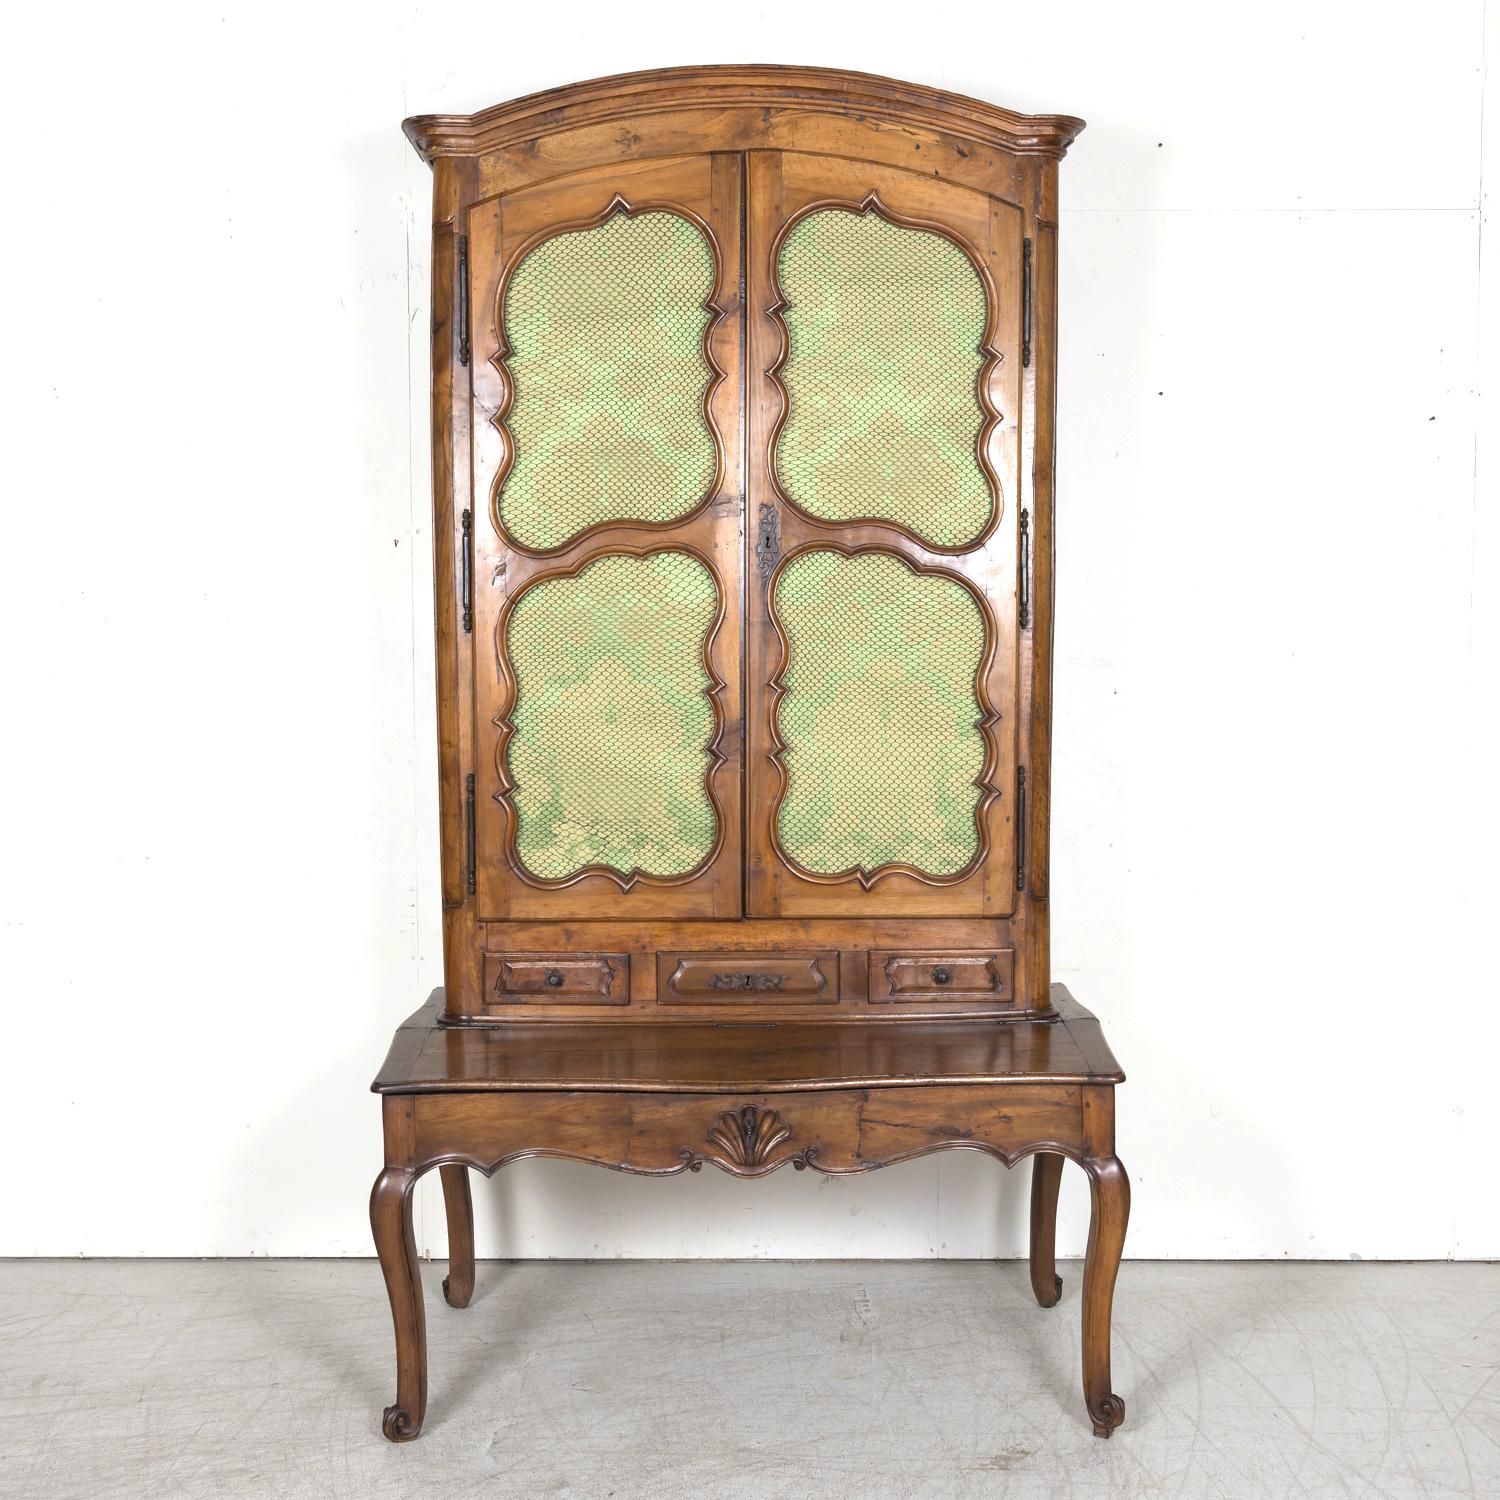 A rare 18th century French Louis XV period chateau bonheur du jour or secrétaire handcrafted of walnut by very talented artisans in Lyon for a wealthy chateau owner near Villeurbanne, circa 1750s. This impressive antique French secretary features a